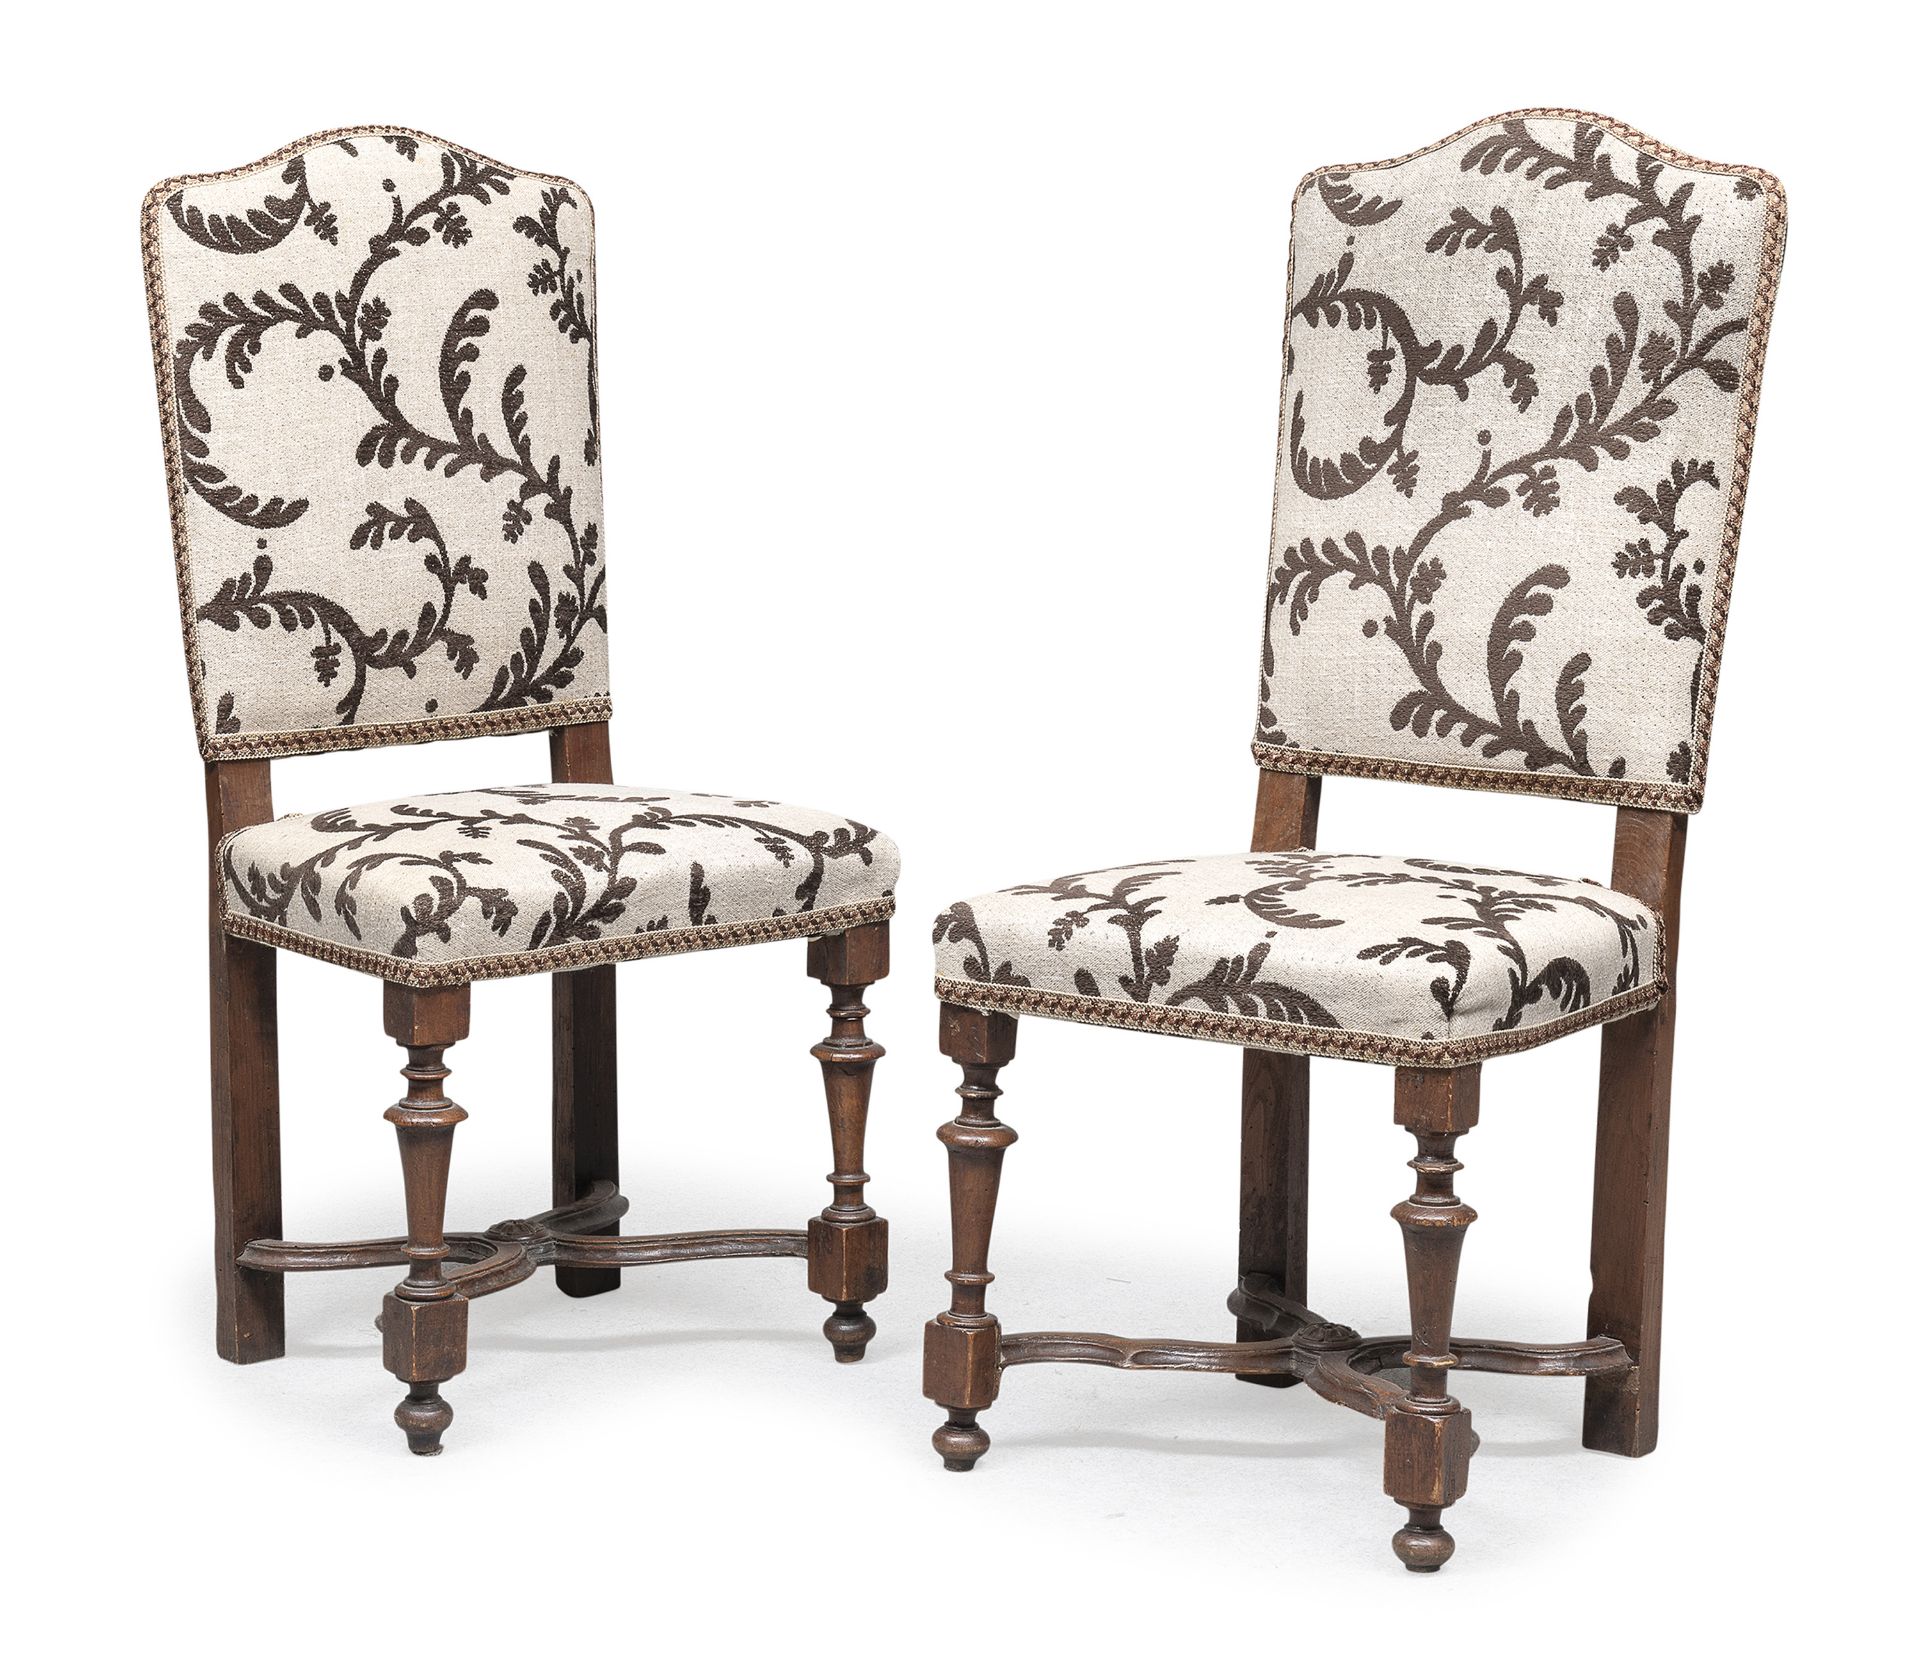 PAIR OF CHESTNUT CHAIRS CENTRAL ITALY EARLY 18TH CENTURY